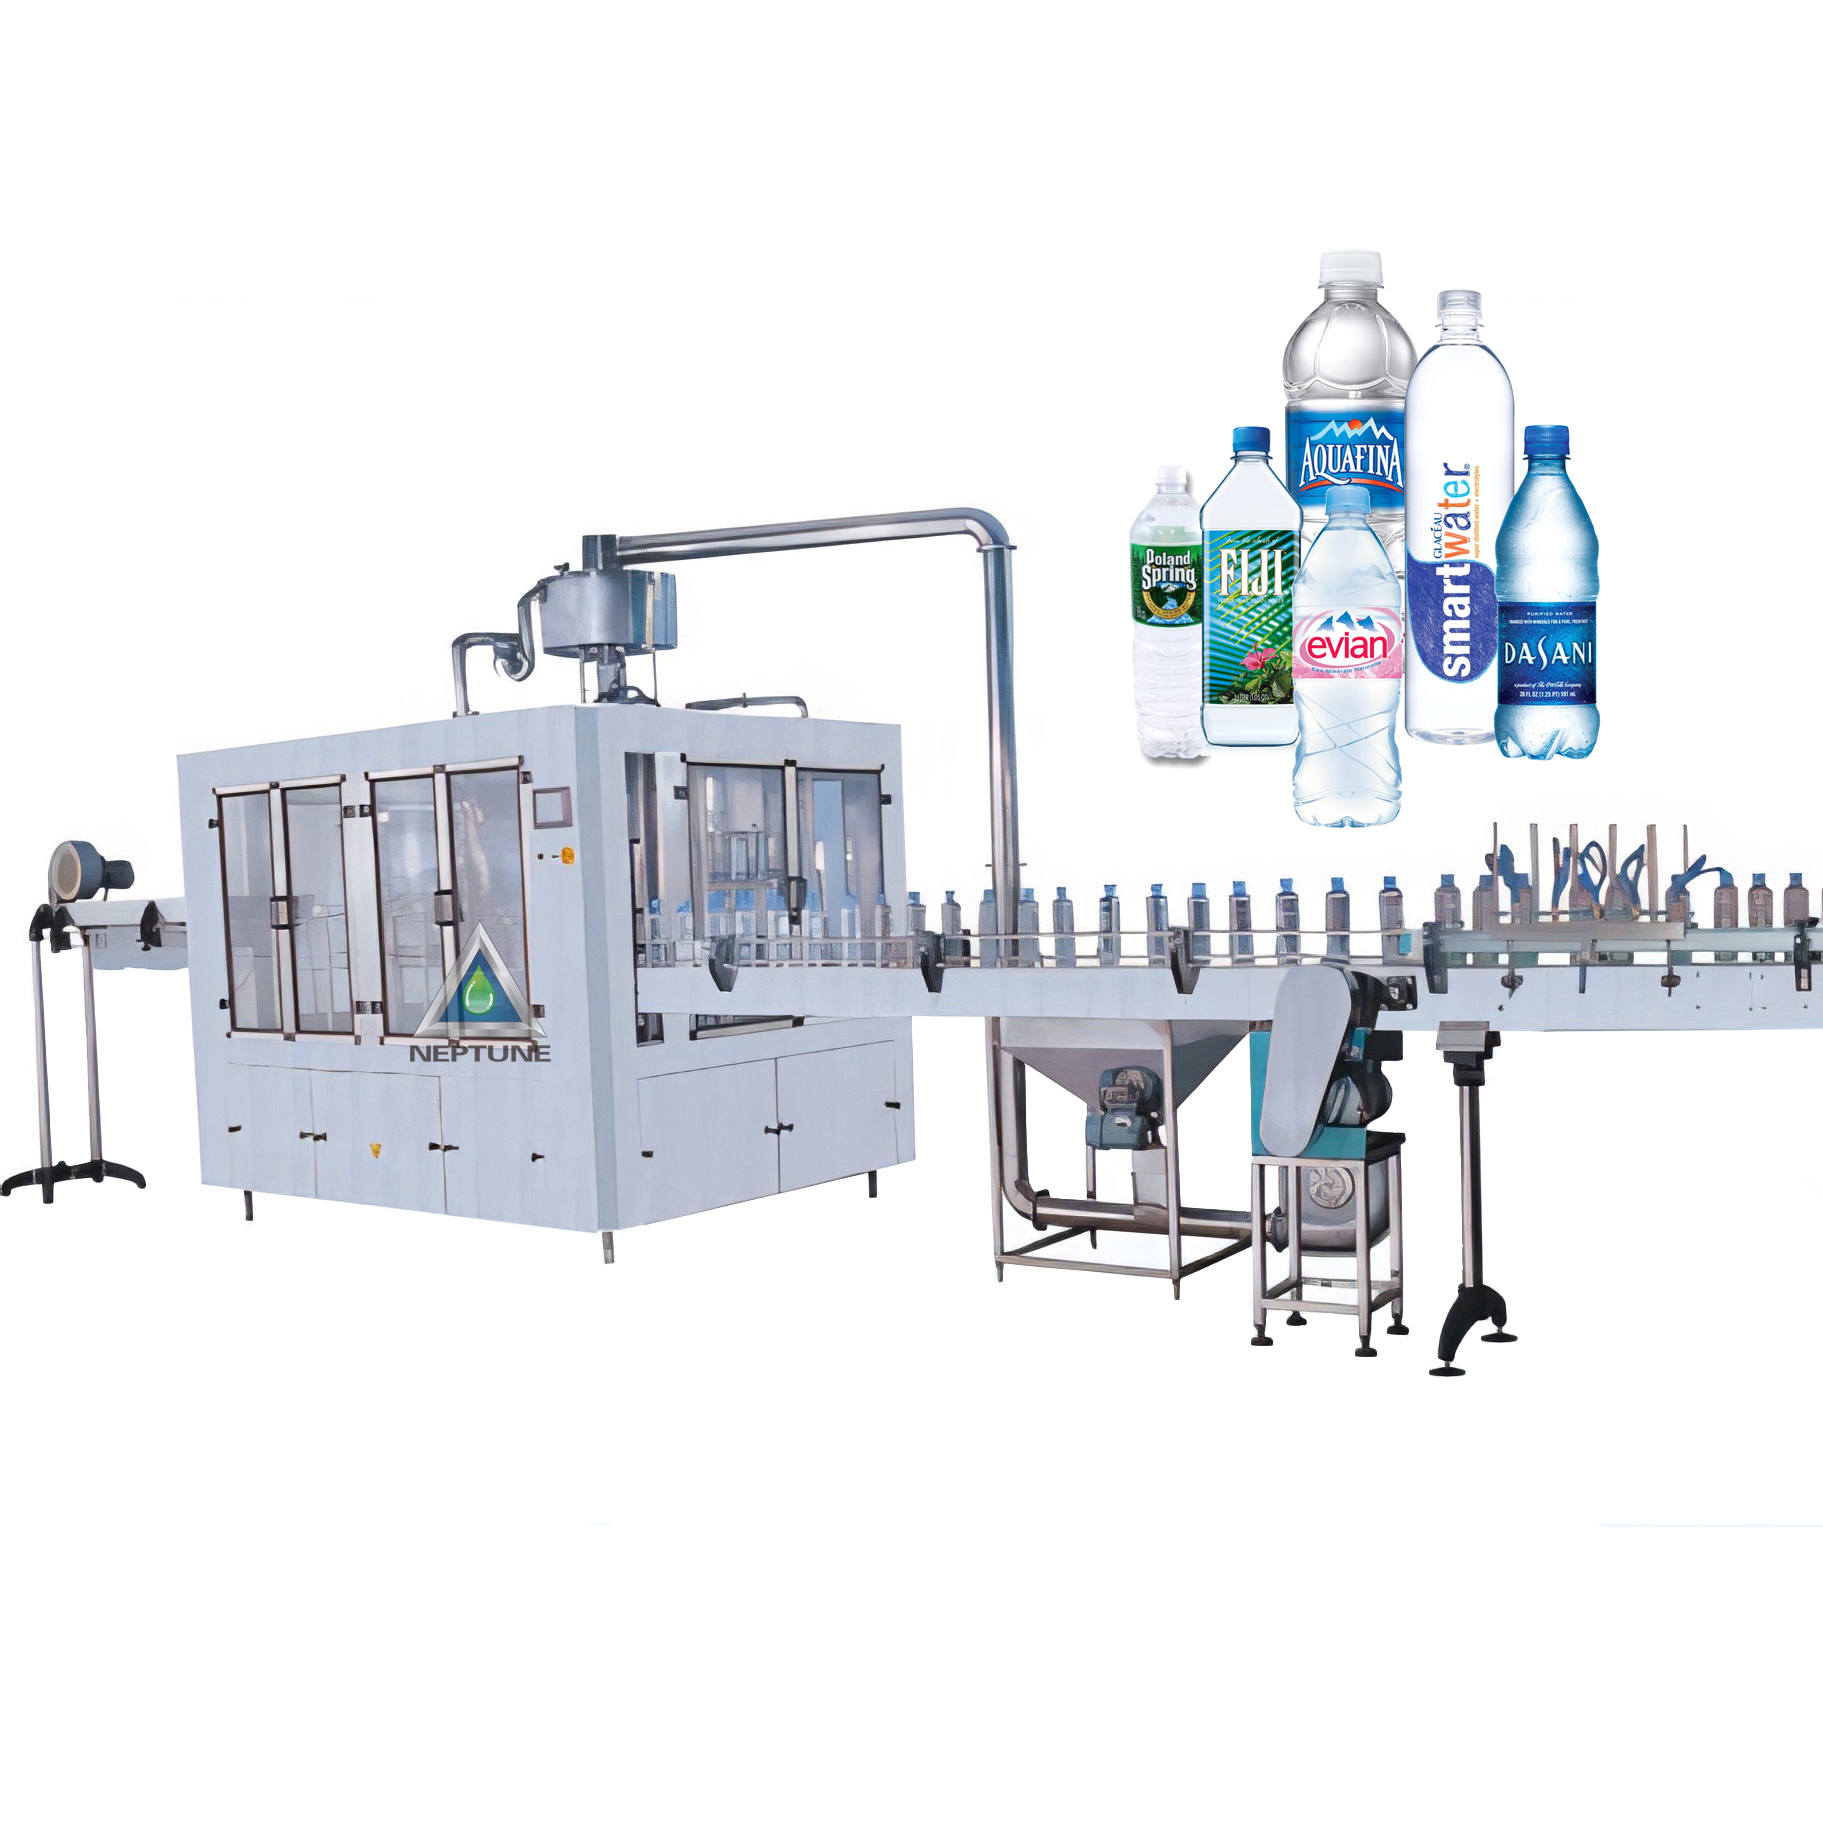 16-12-6 water bottlong machine collect rinser filler and capper in one mono block machine. It is rotary type filling machine. 